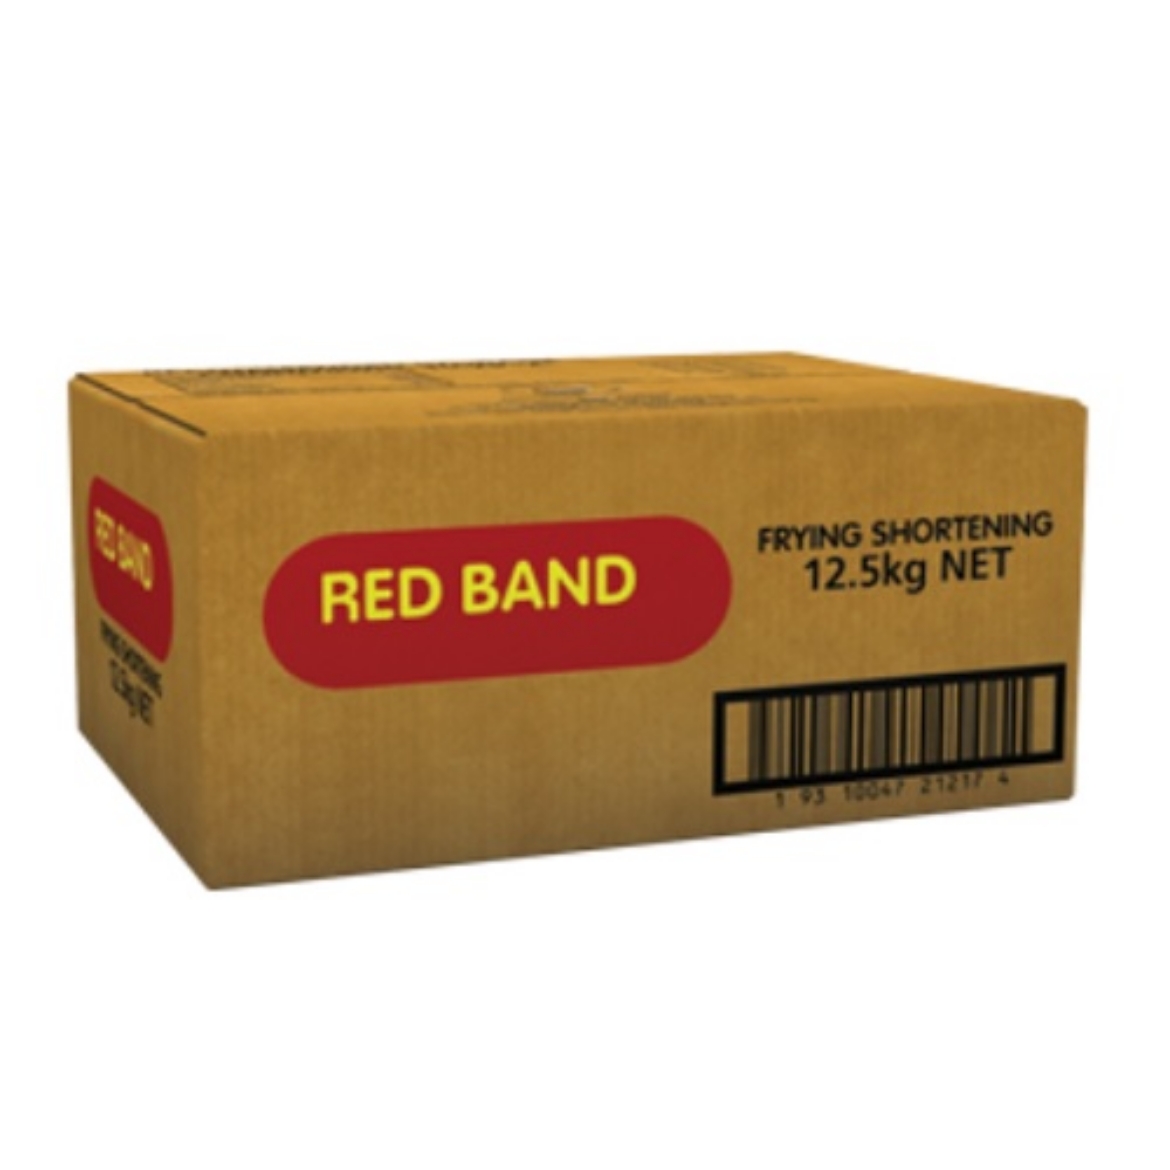 Picture of 12.5KG RED BAND FRYING SHORTENING